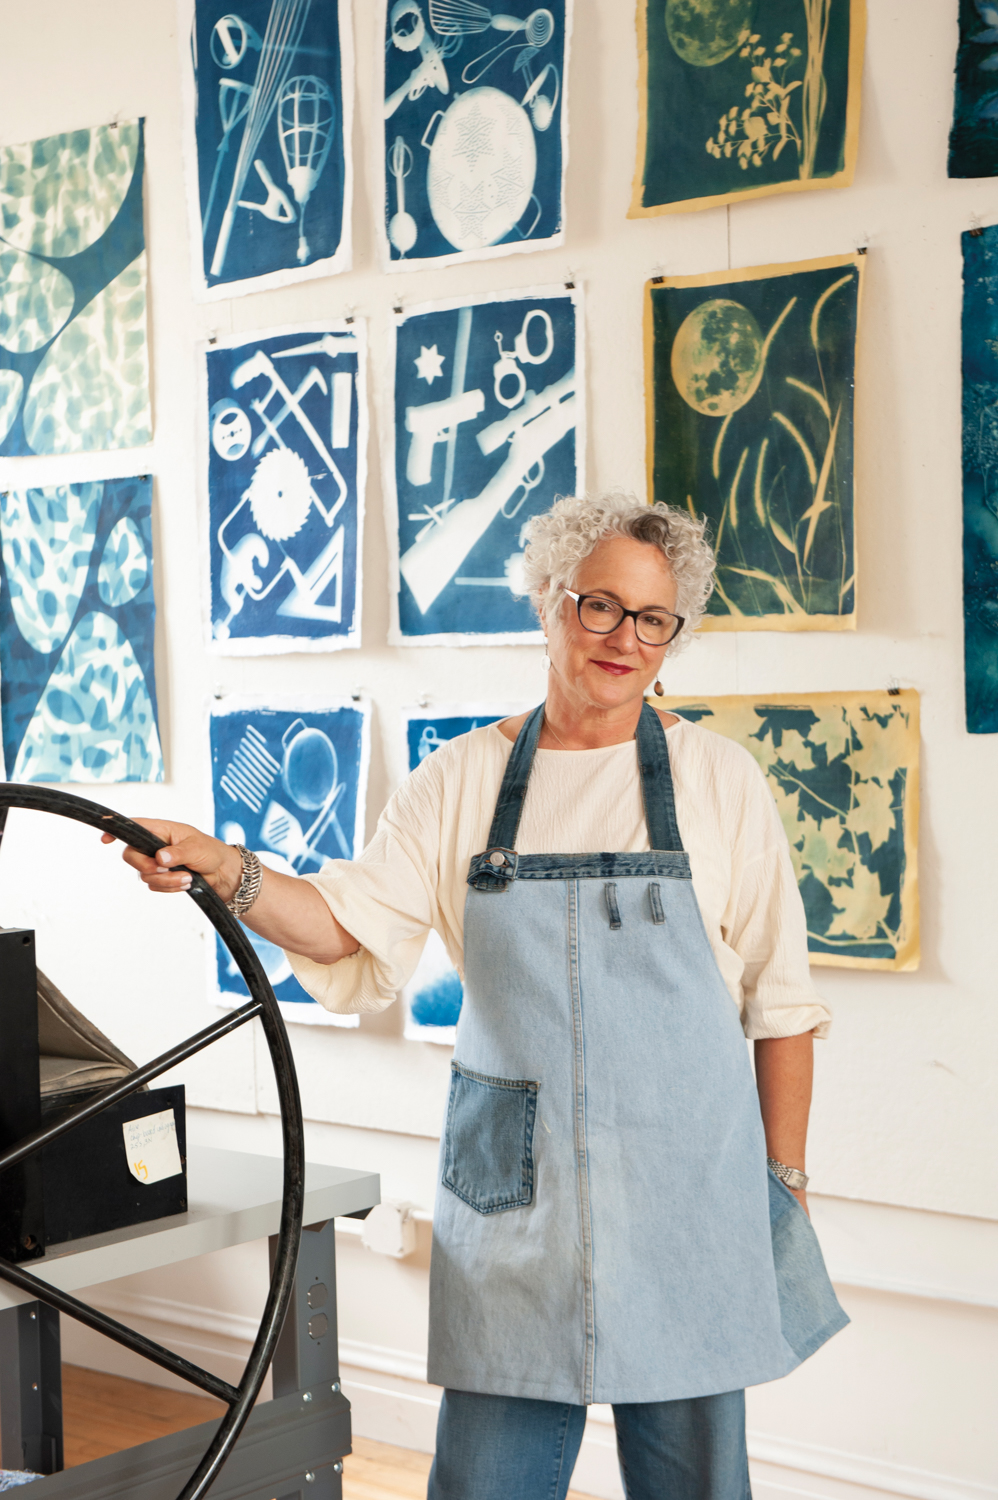 A white woman with white hair in a denim apron stands in front of blue cyanotypes.